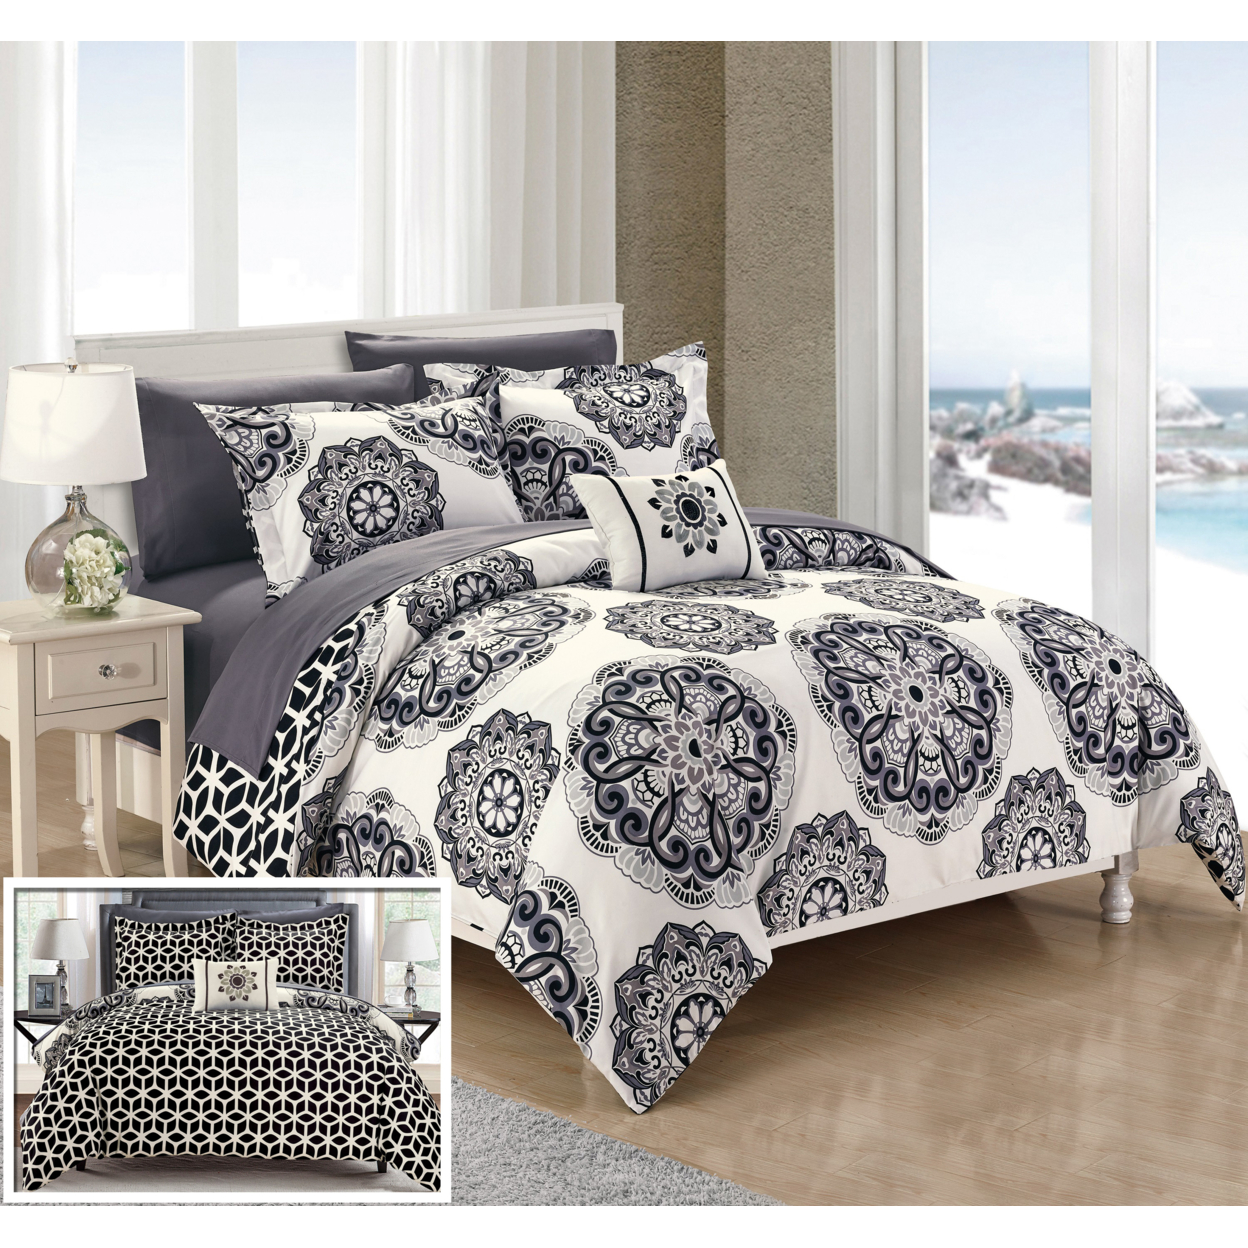 8 Or 6 Pc. Barella Super Soft Large Printed Medallion REVERSIBLE With Geometric Printed Backing Comforter Set - Navy, Queen